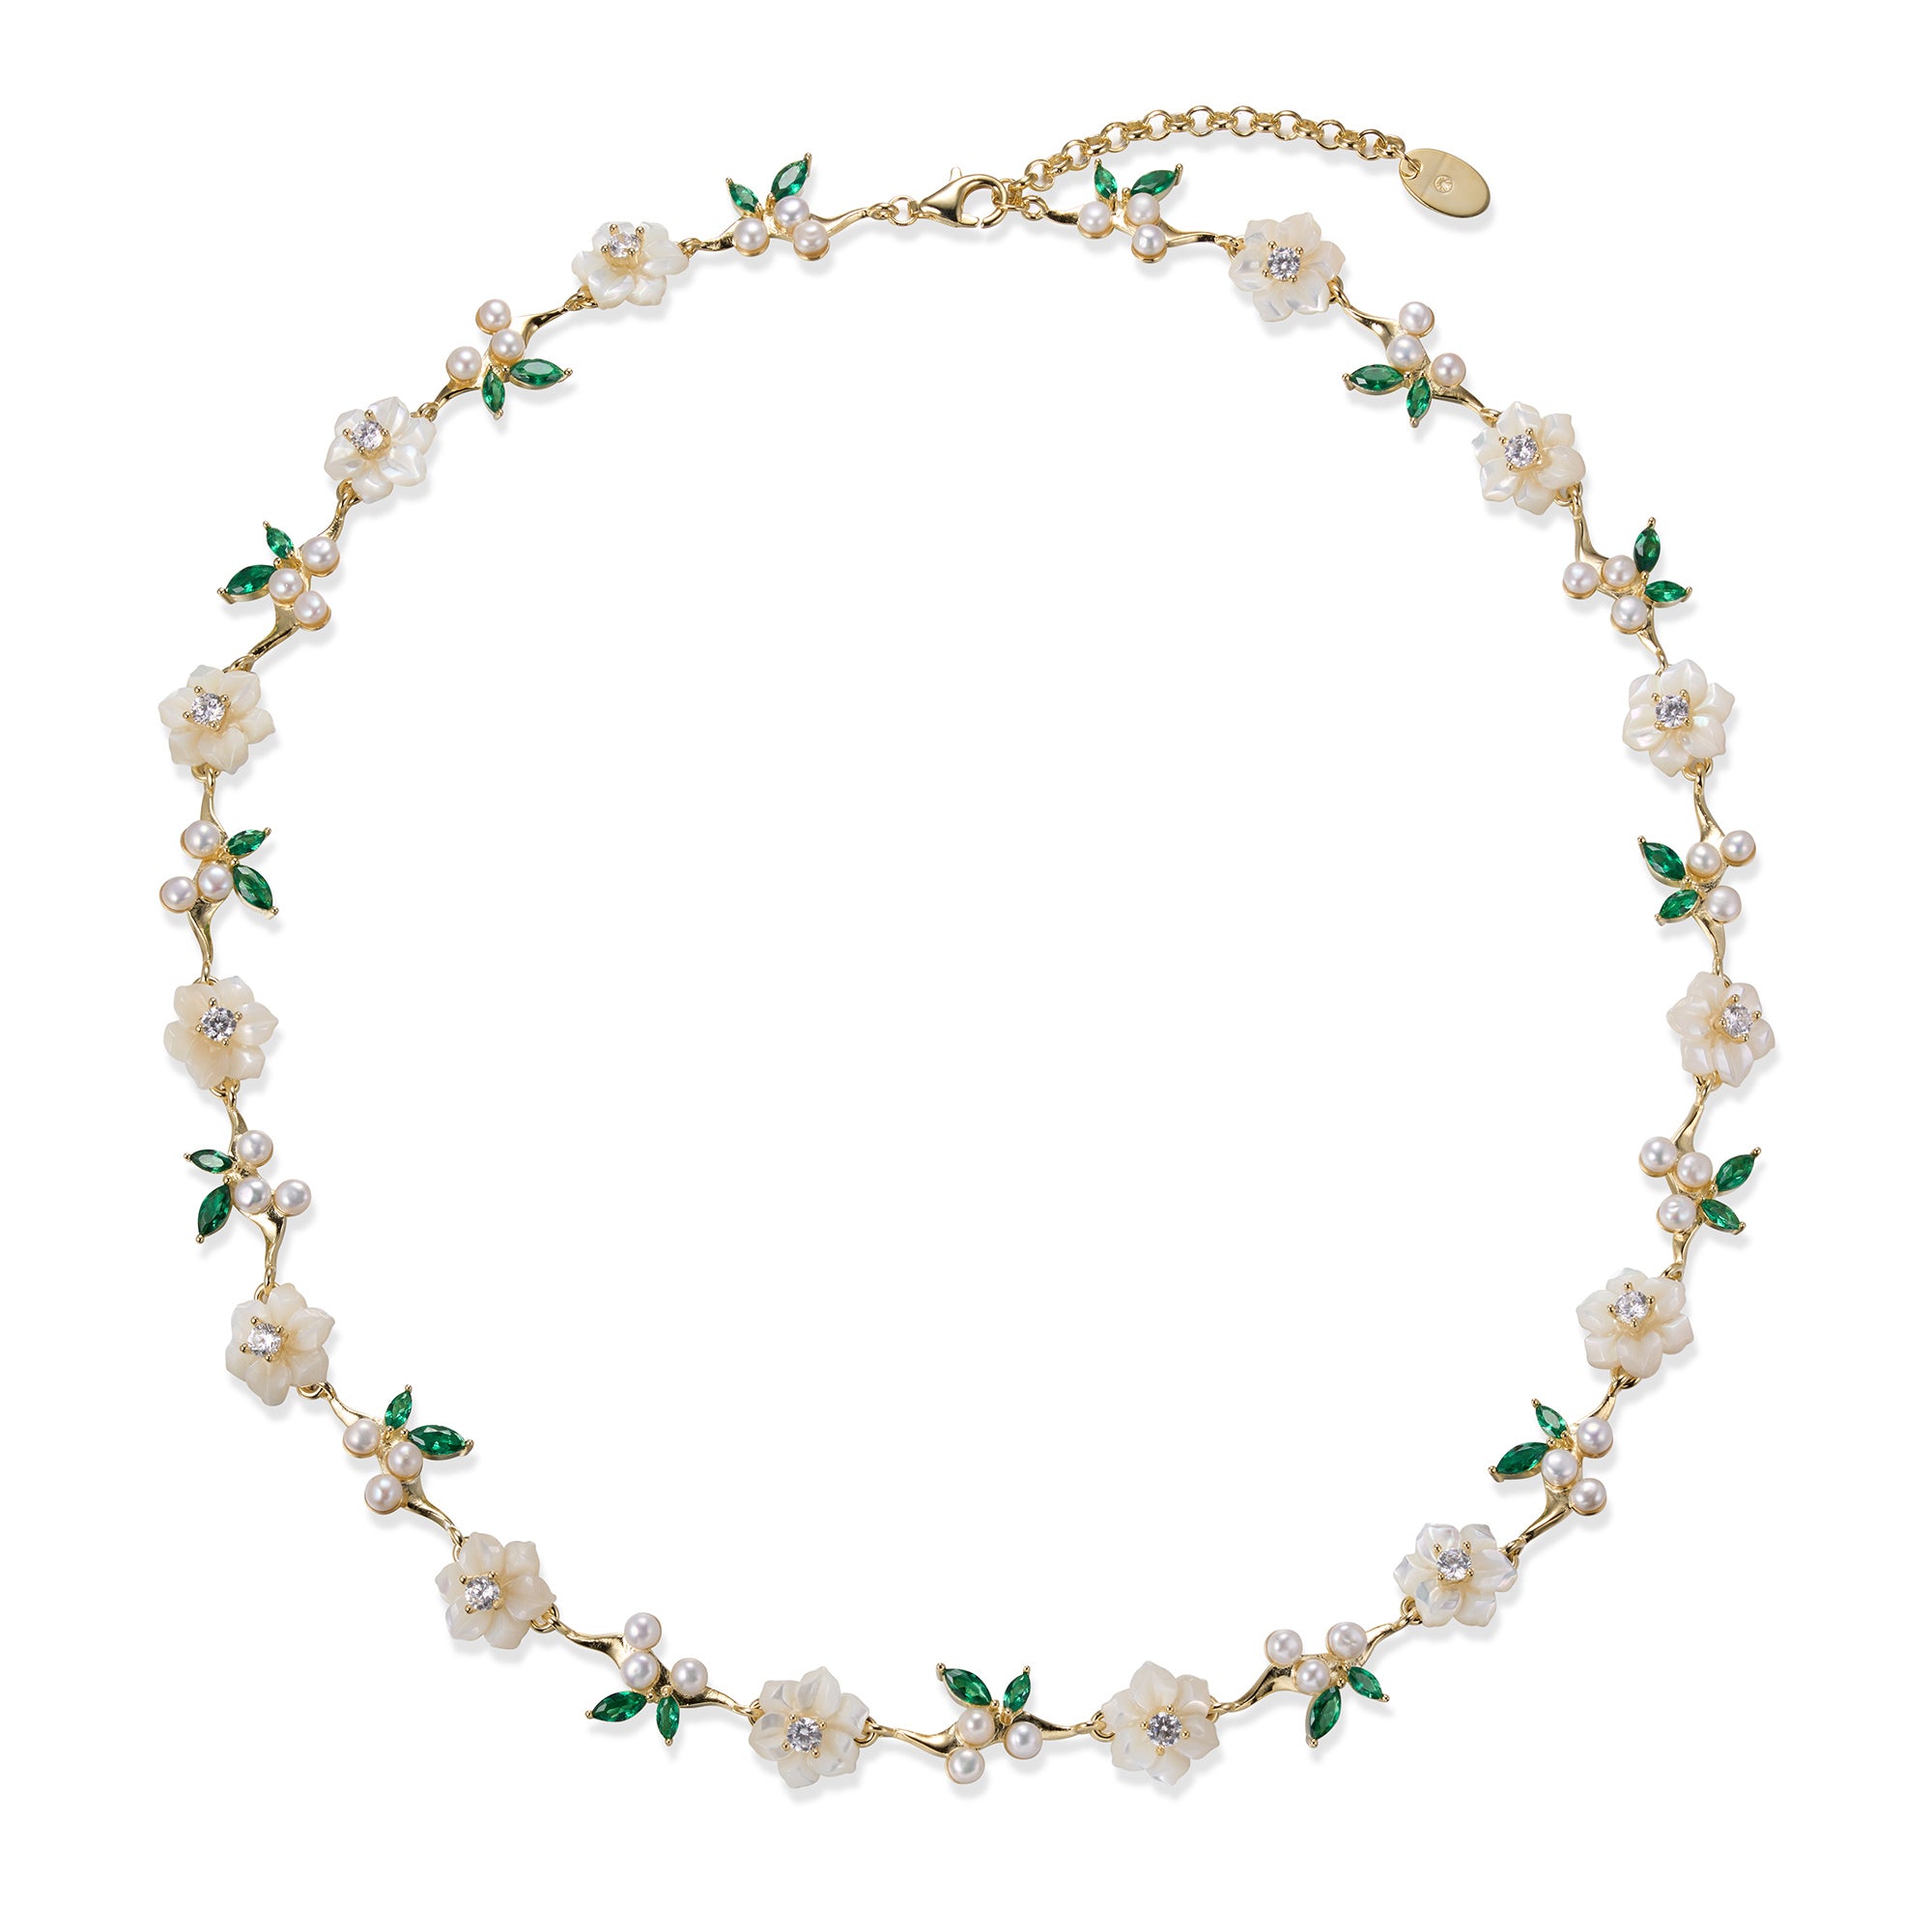 A silver gold plated necklace with green stones, pearls and shell flowers.